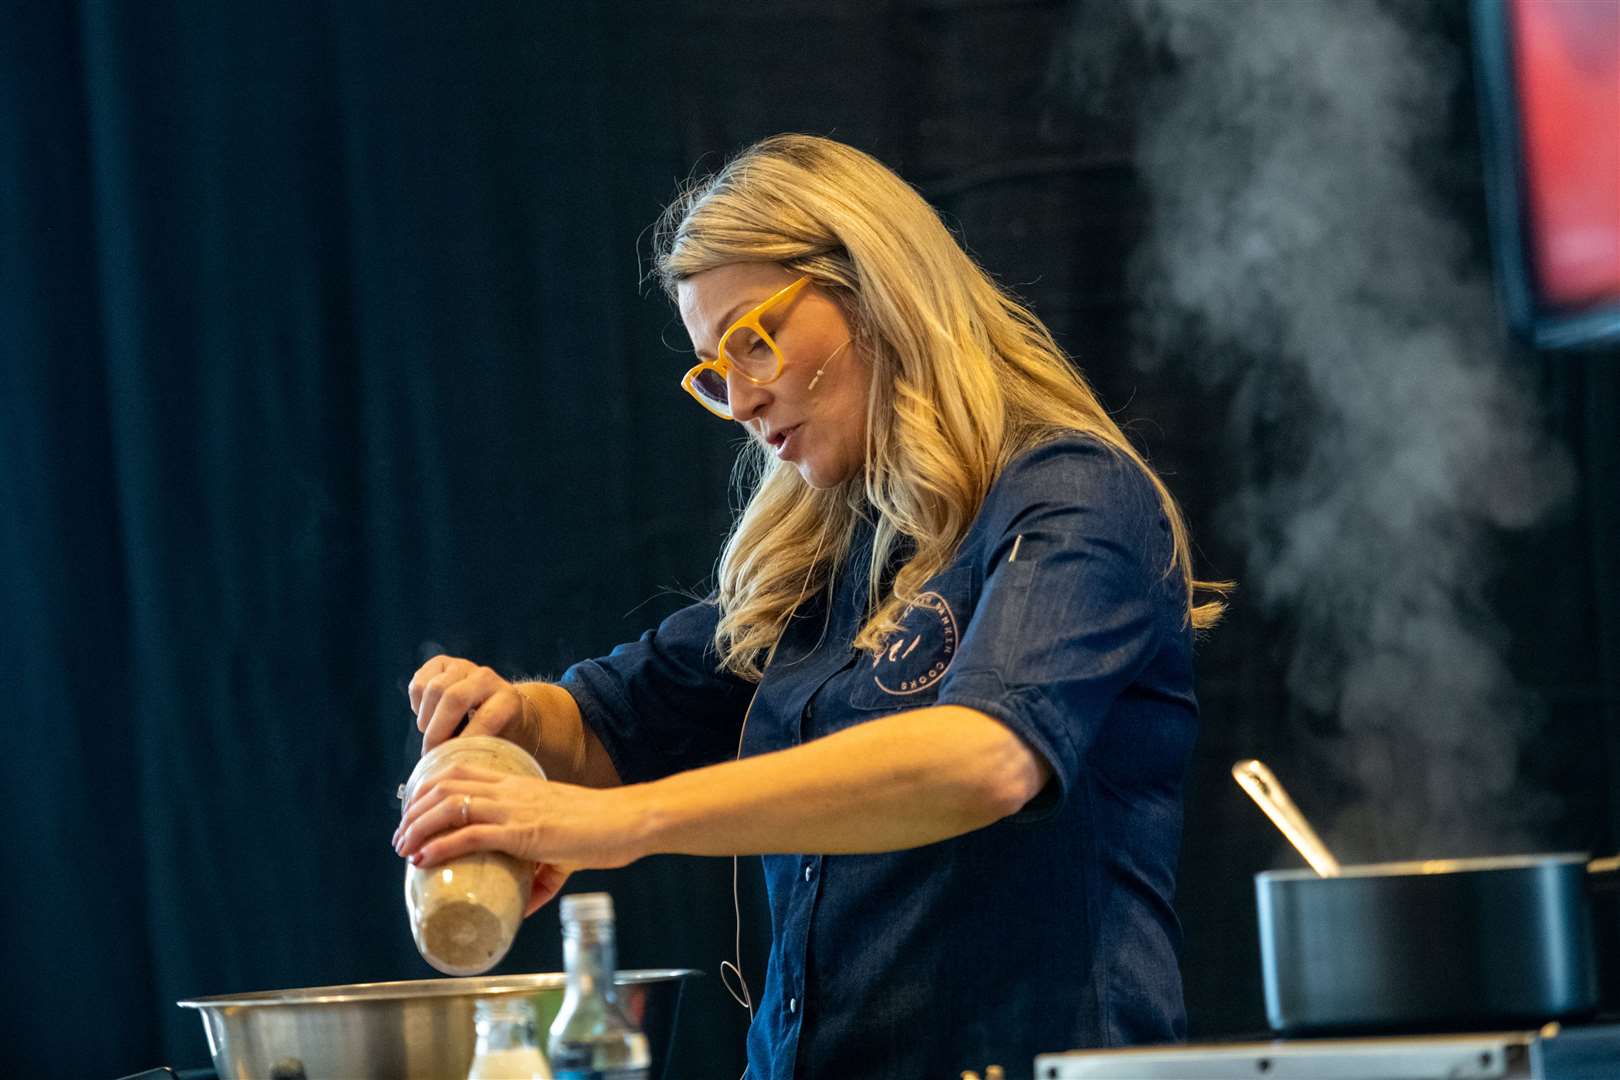 Sarah Rankin did a live cooking demonstration at the Taster of Inverness event